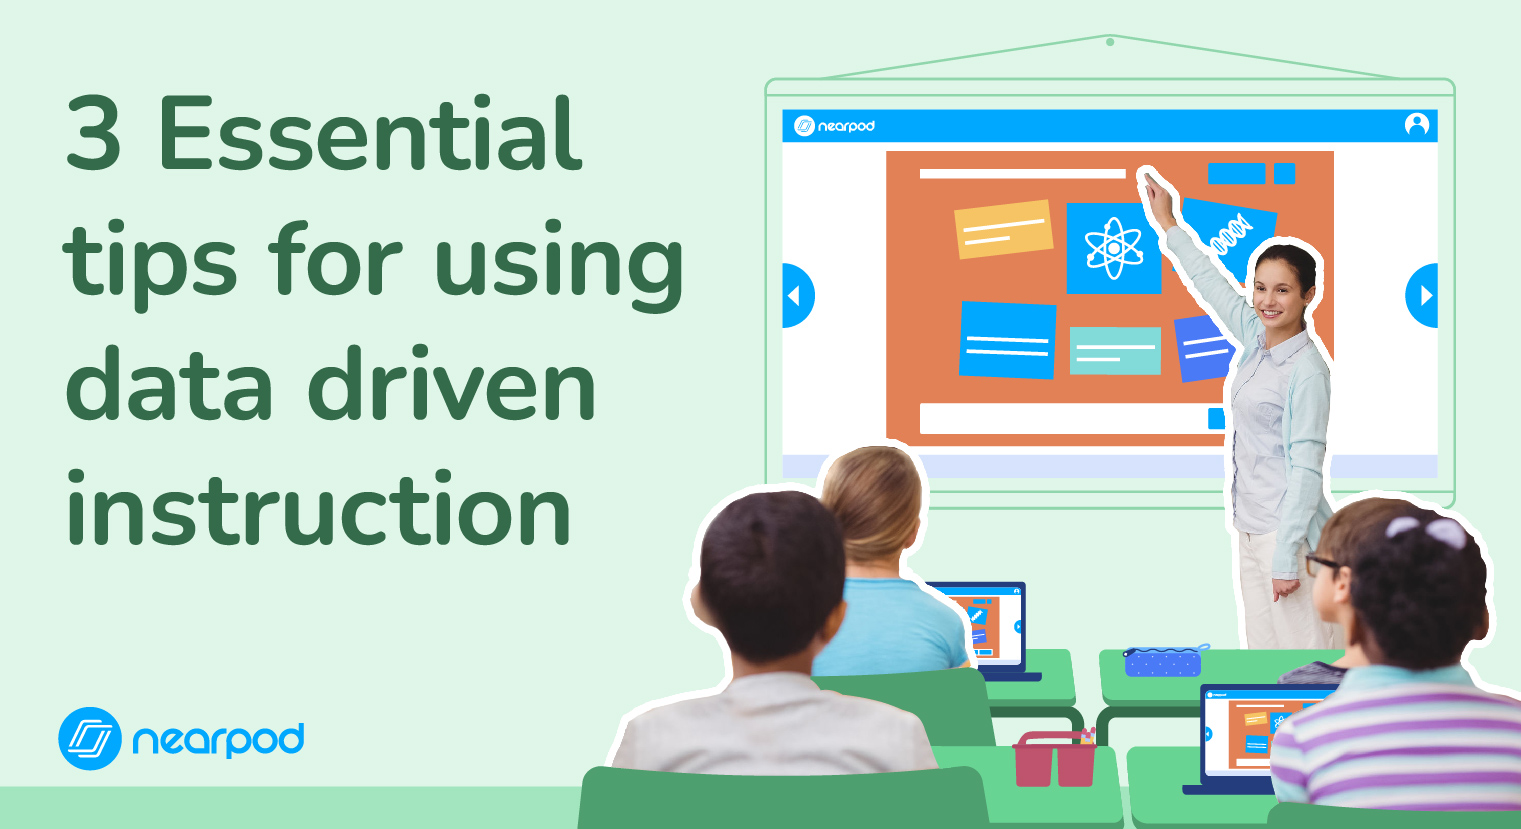 3 Essential tips for using data driven instruction